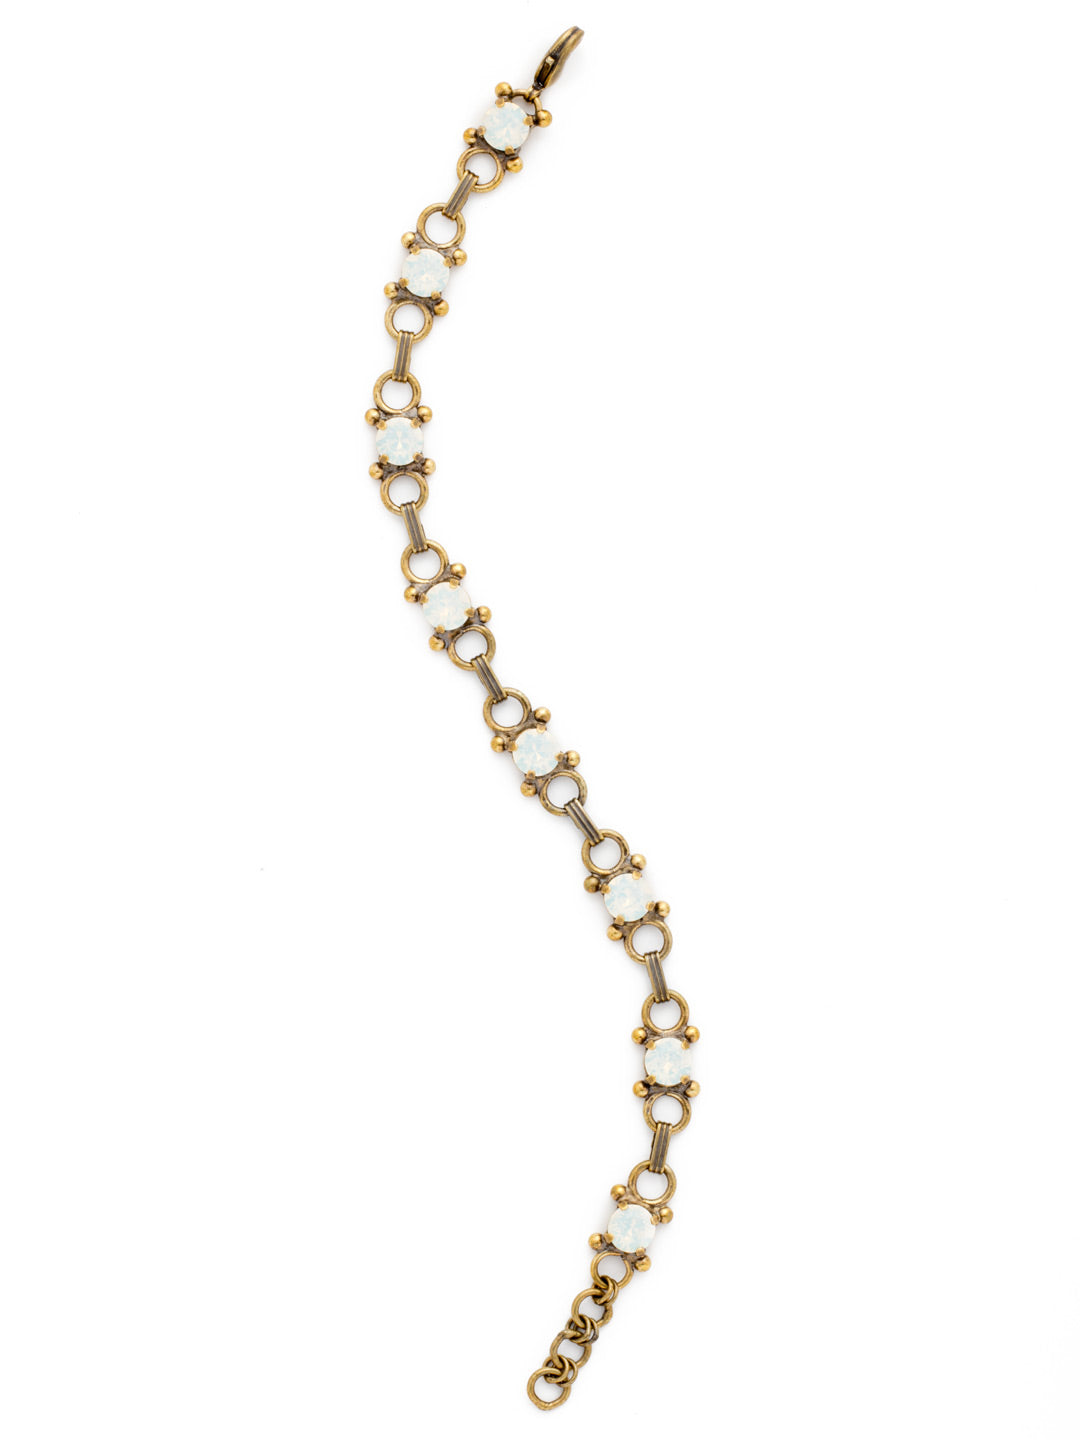 Mini Eyelet Line Bracelet - BDH5AGPLU - <p>Our mini Eyelet Line Bracelet offers a classic design with edgy elements. Add this line bracelet to any look for just enough sparkle. From Sorrelli's Pearl Luster collection in our Antique Gold-tone finish.</p>